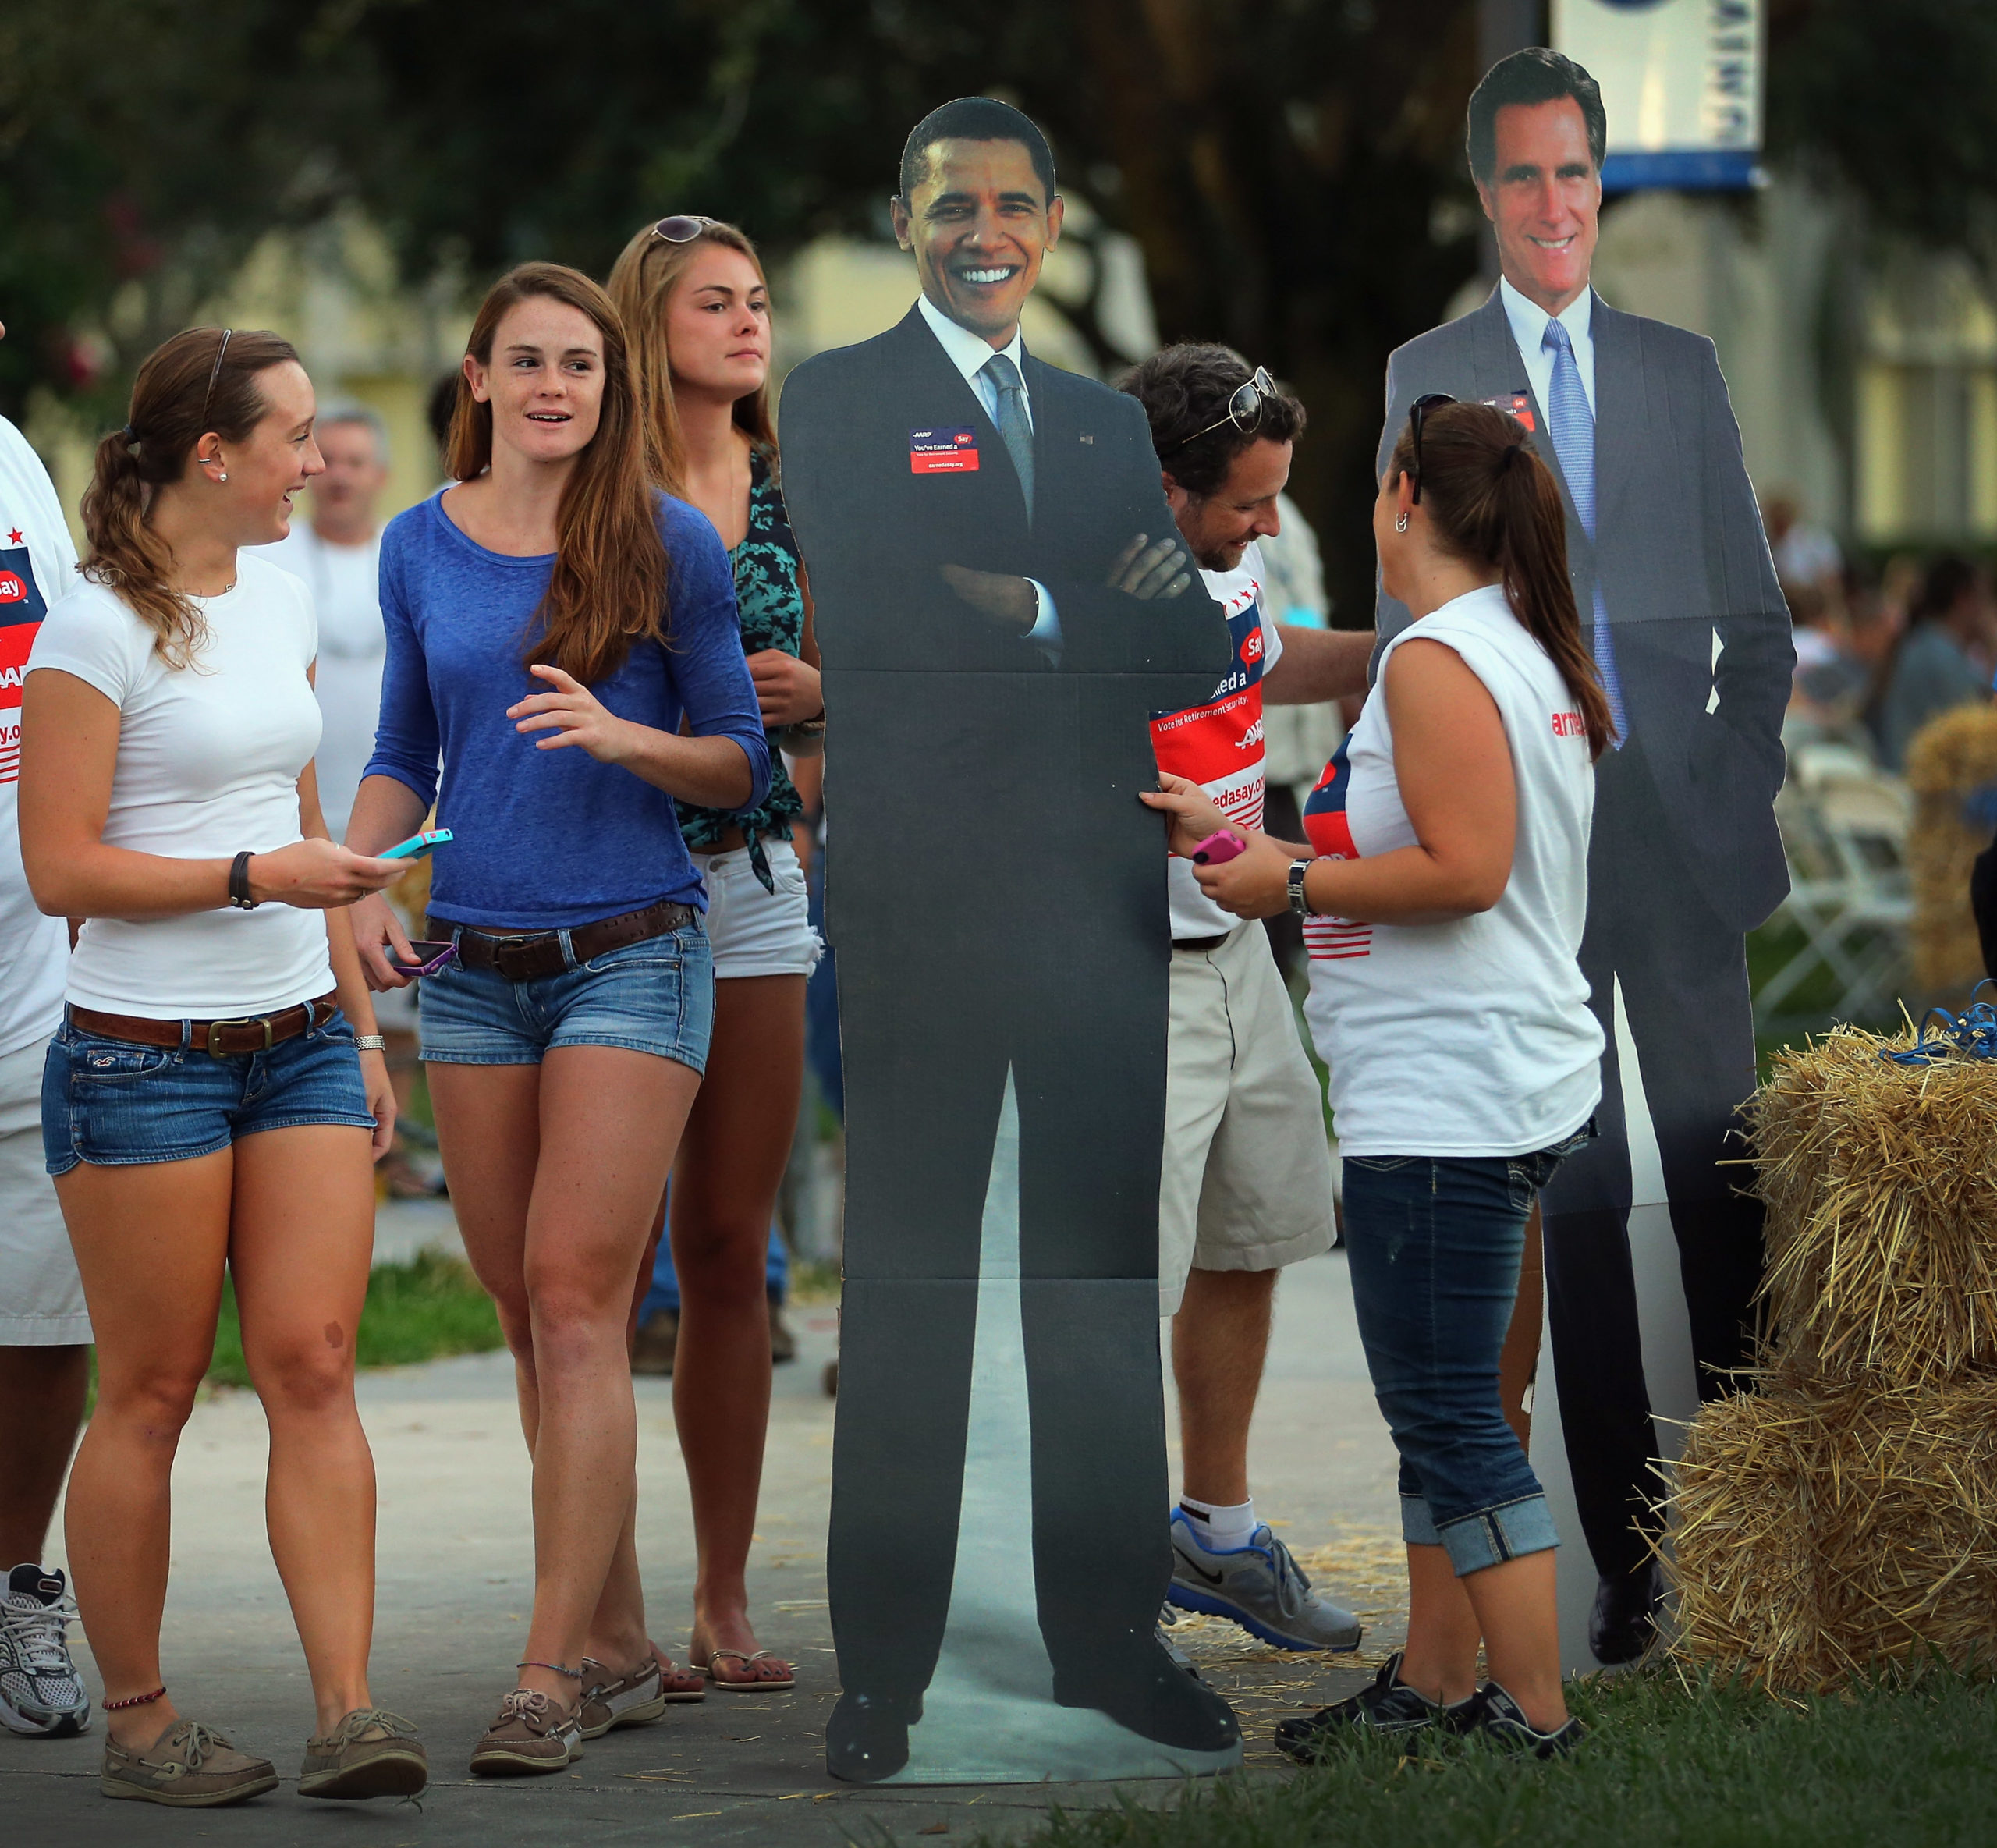 People look at card board cutouts of U.S. President Barack Obama and Republican presidential candidate Mitt Romney at Lynn University as the campus prepares for the final presidential debate October 20, 2012 in Boca Raton, Florida. The debate, which will be held on Monday, October 22, will mark the final meeting between the two candidates before the general election on November 6th. (Photo by Joe Raedle/Getty Images)